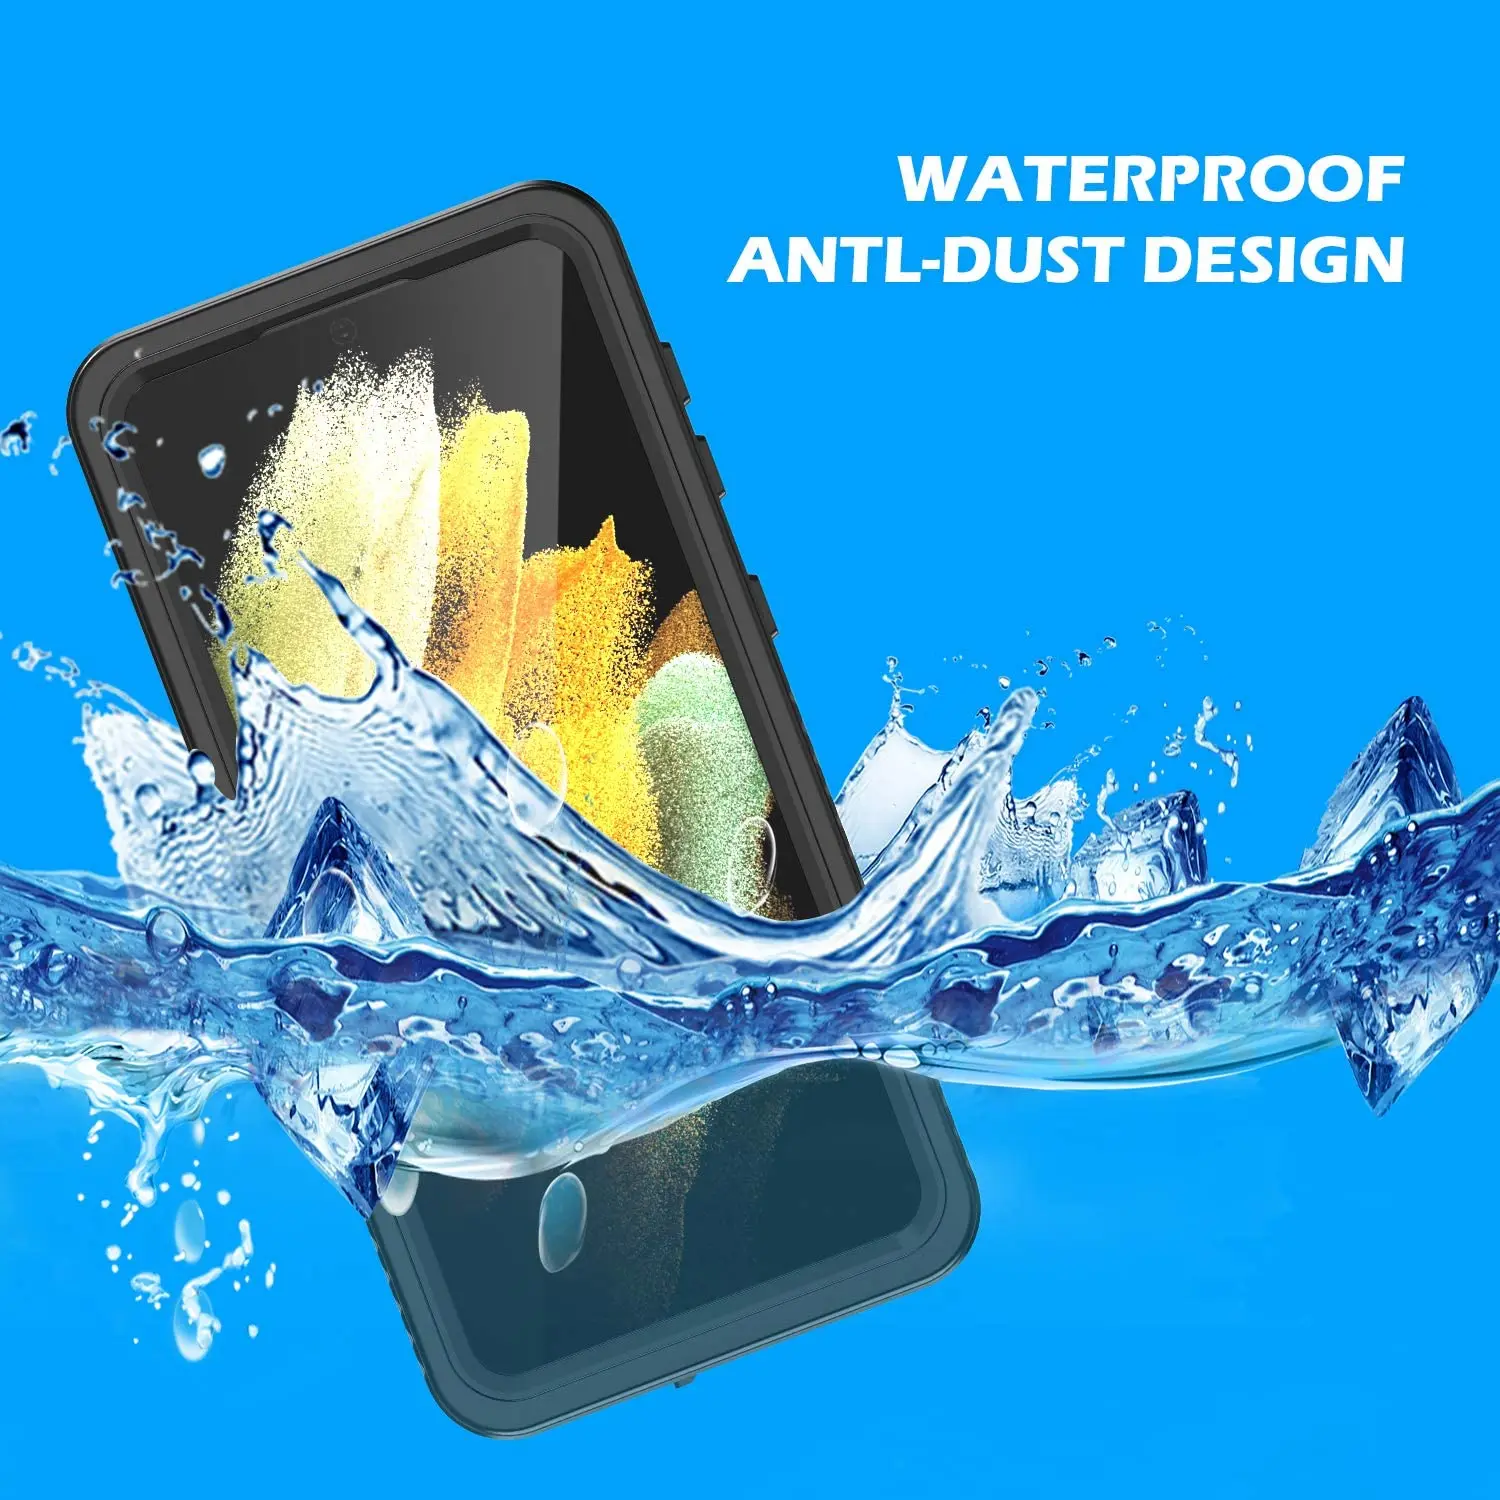 s21 ultra waterproof case for samsung galaxy s21 ultra 5g s21 swim proof case built in screen protector cover protection capa free global shipping